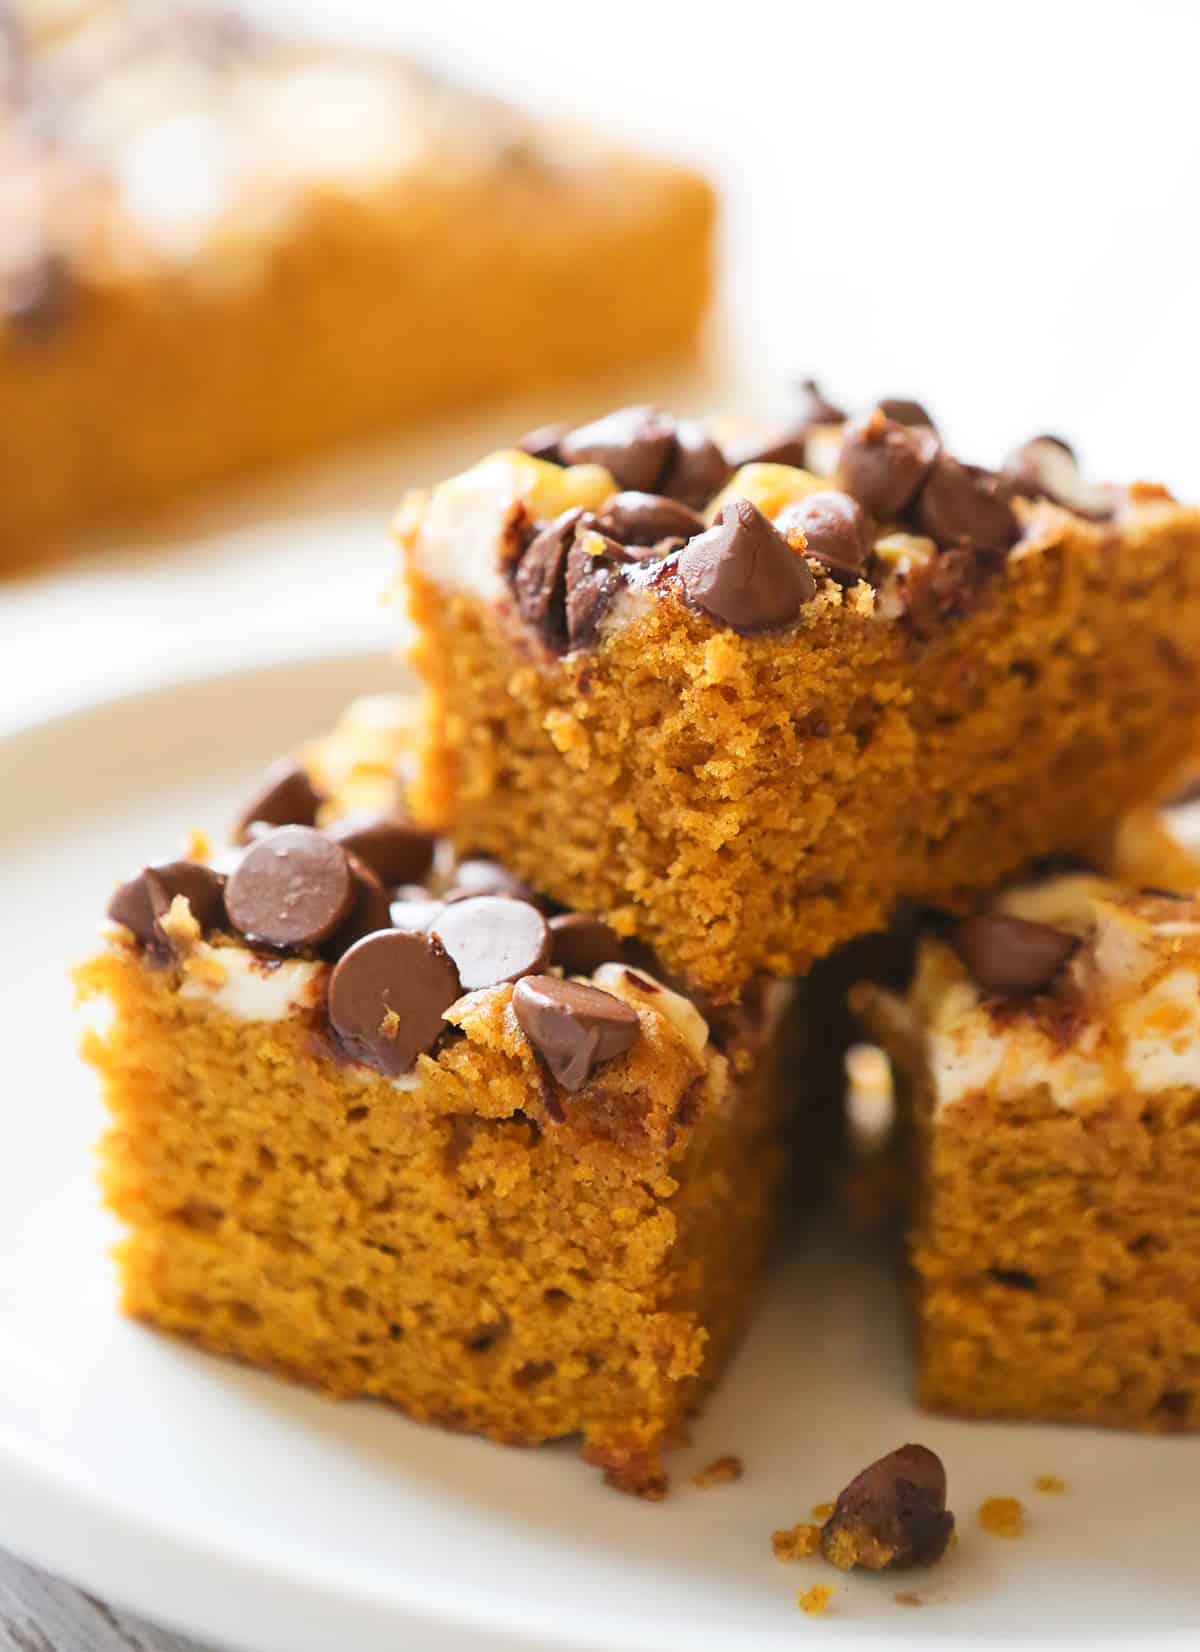 Stacked pumpkin cake with chocolate chips on top.